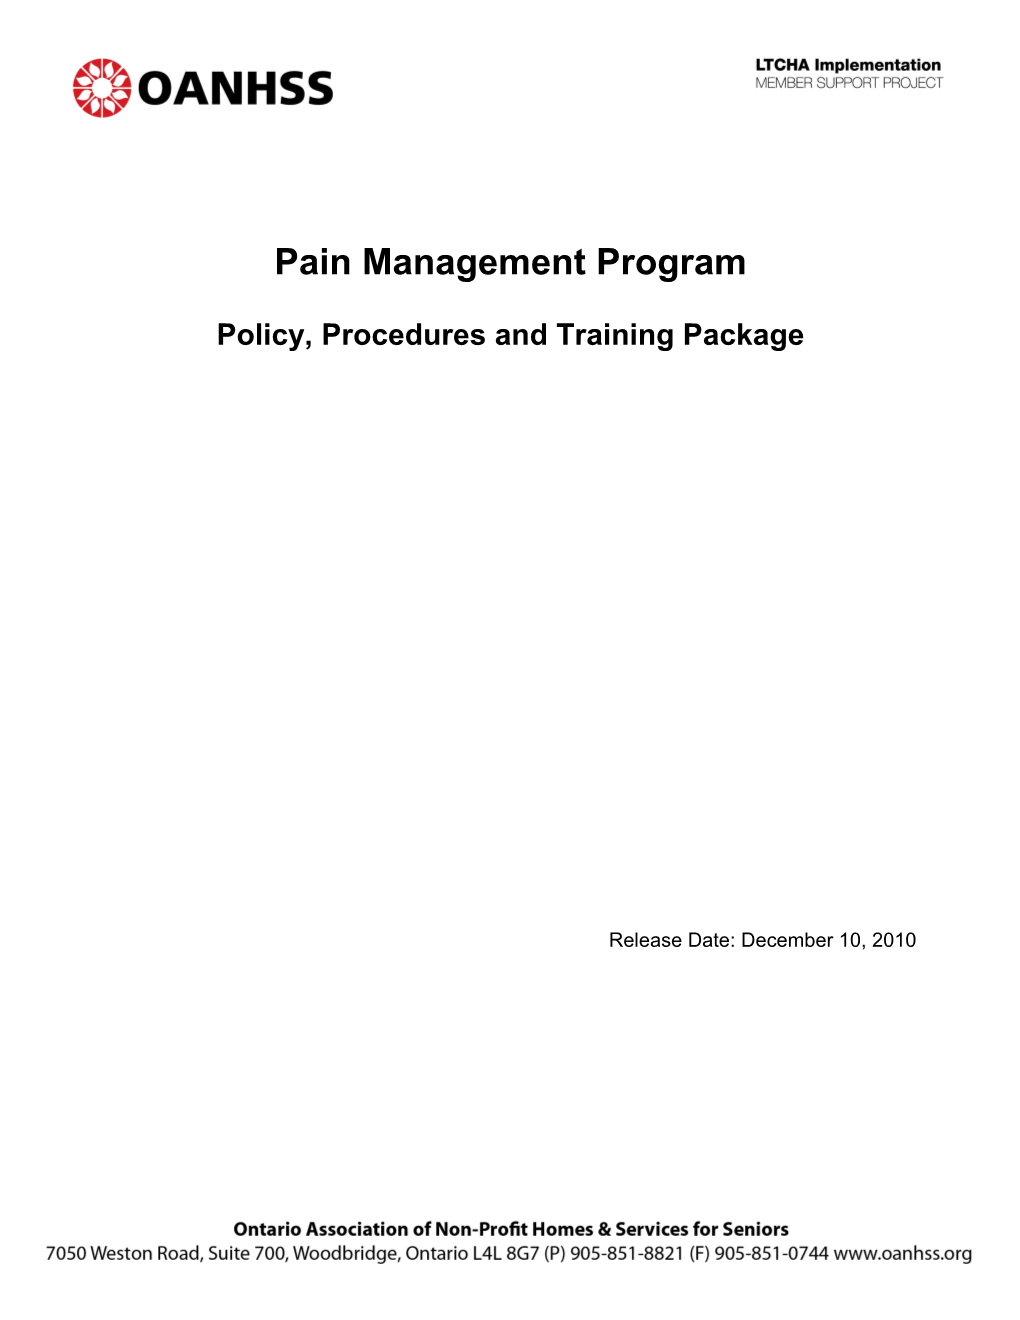 Pain Management Program Policy, Procedures and Training Package